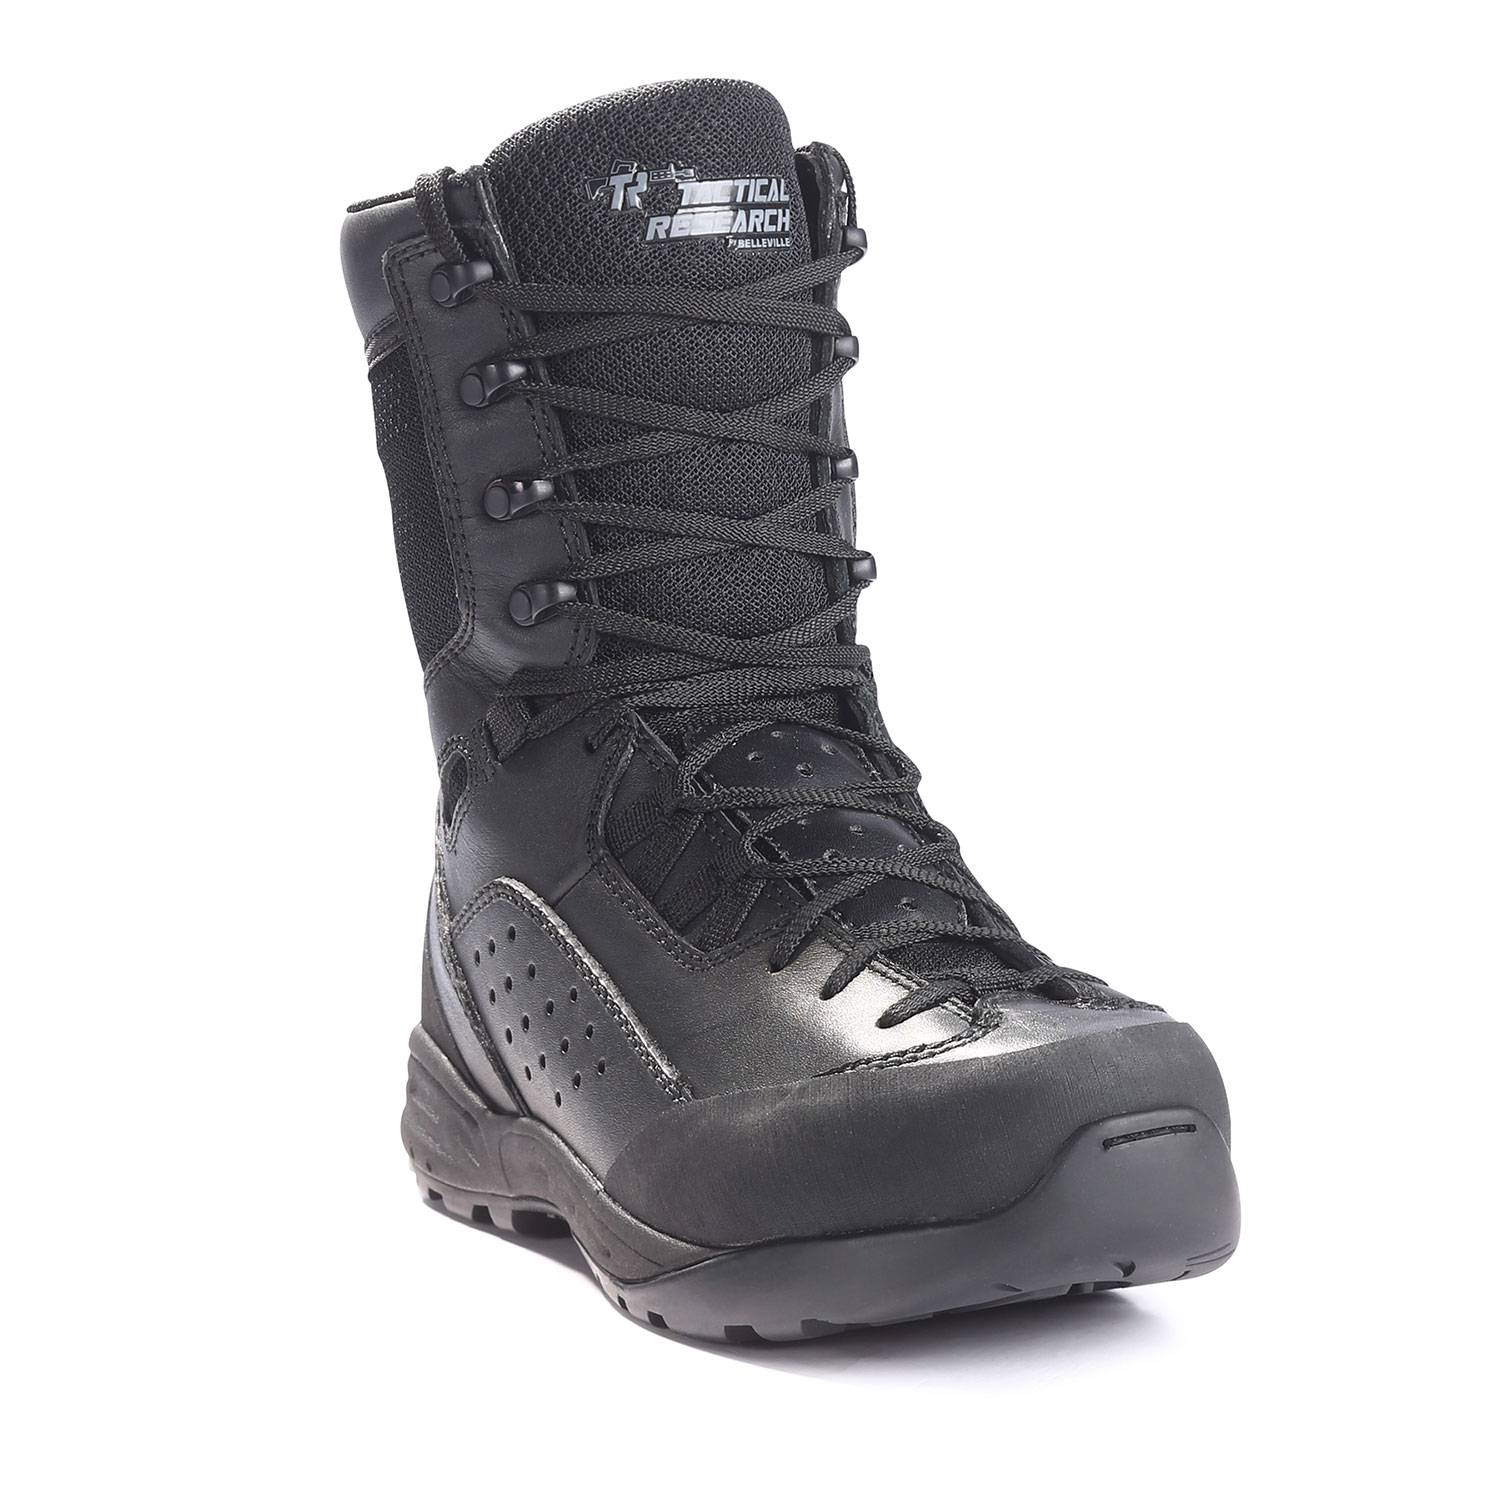 qrf boots